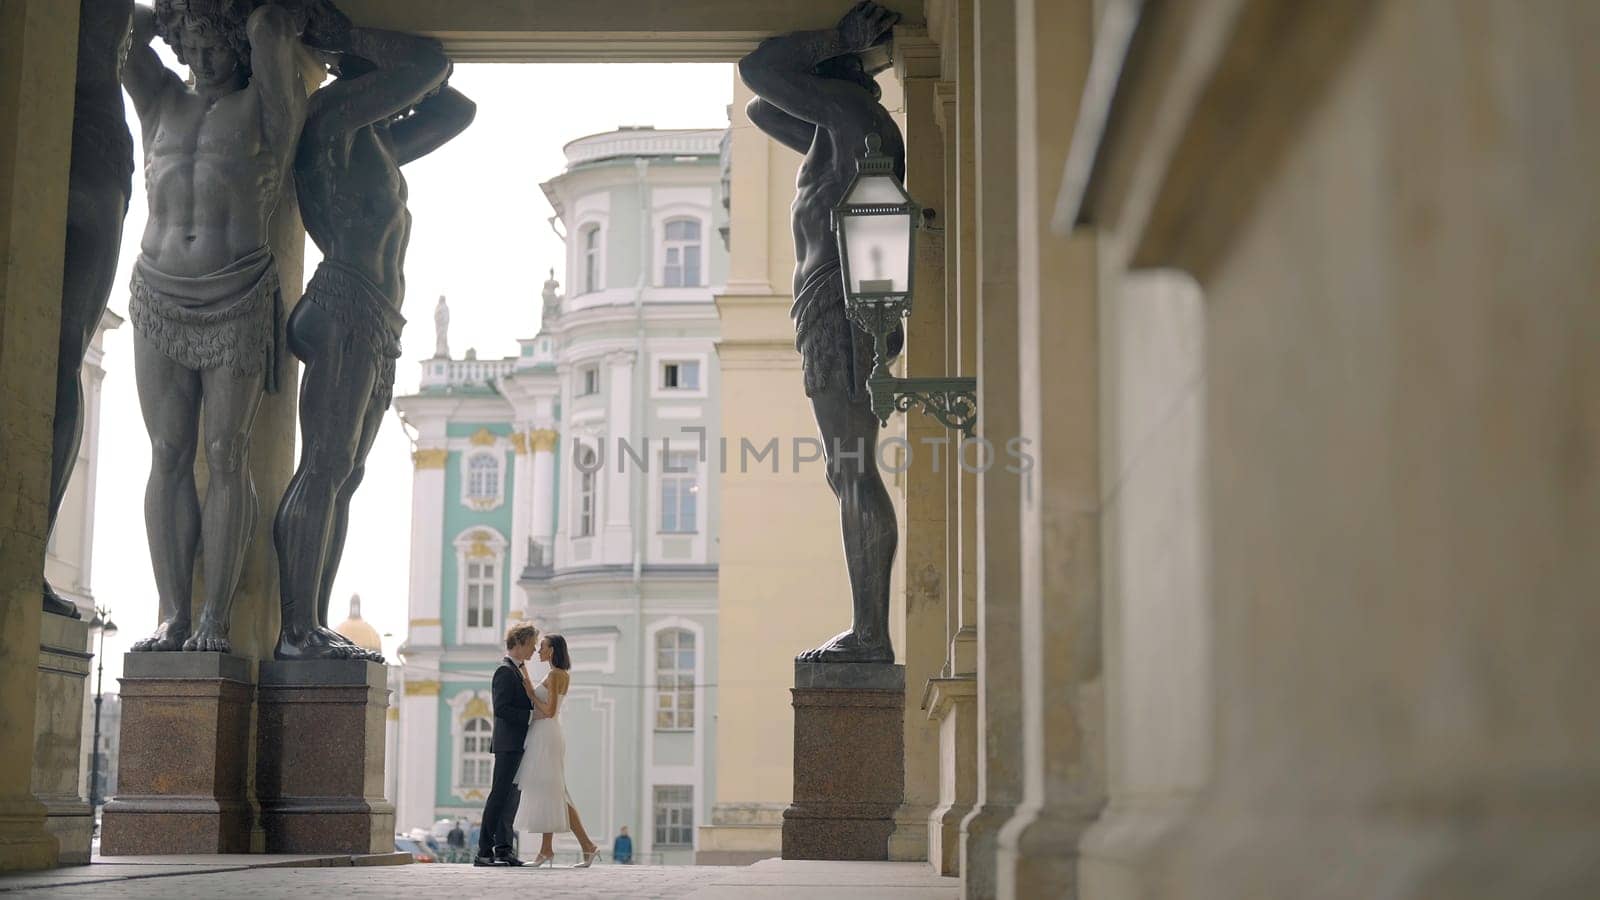 Beautiful newlyweds hug at old building. Action. Small silhouette of newlyweds in distance under arch of tall statues. Beautiful shot with tall statues under arch of building and newlyweds.